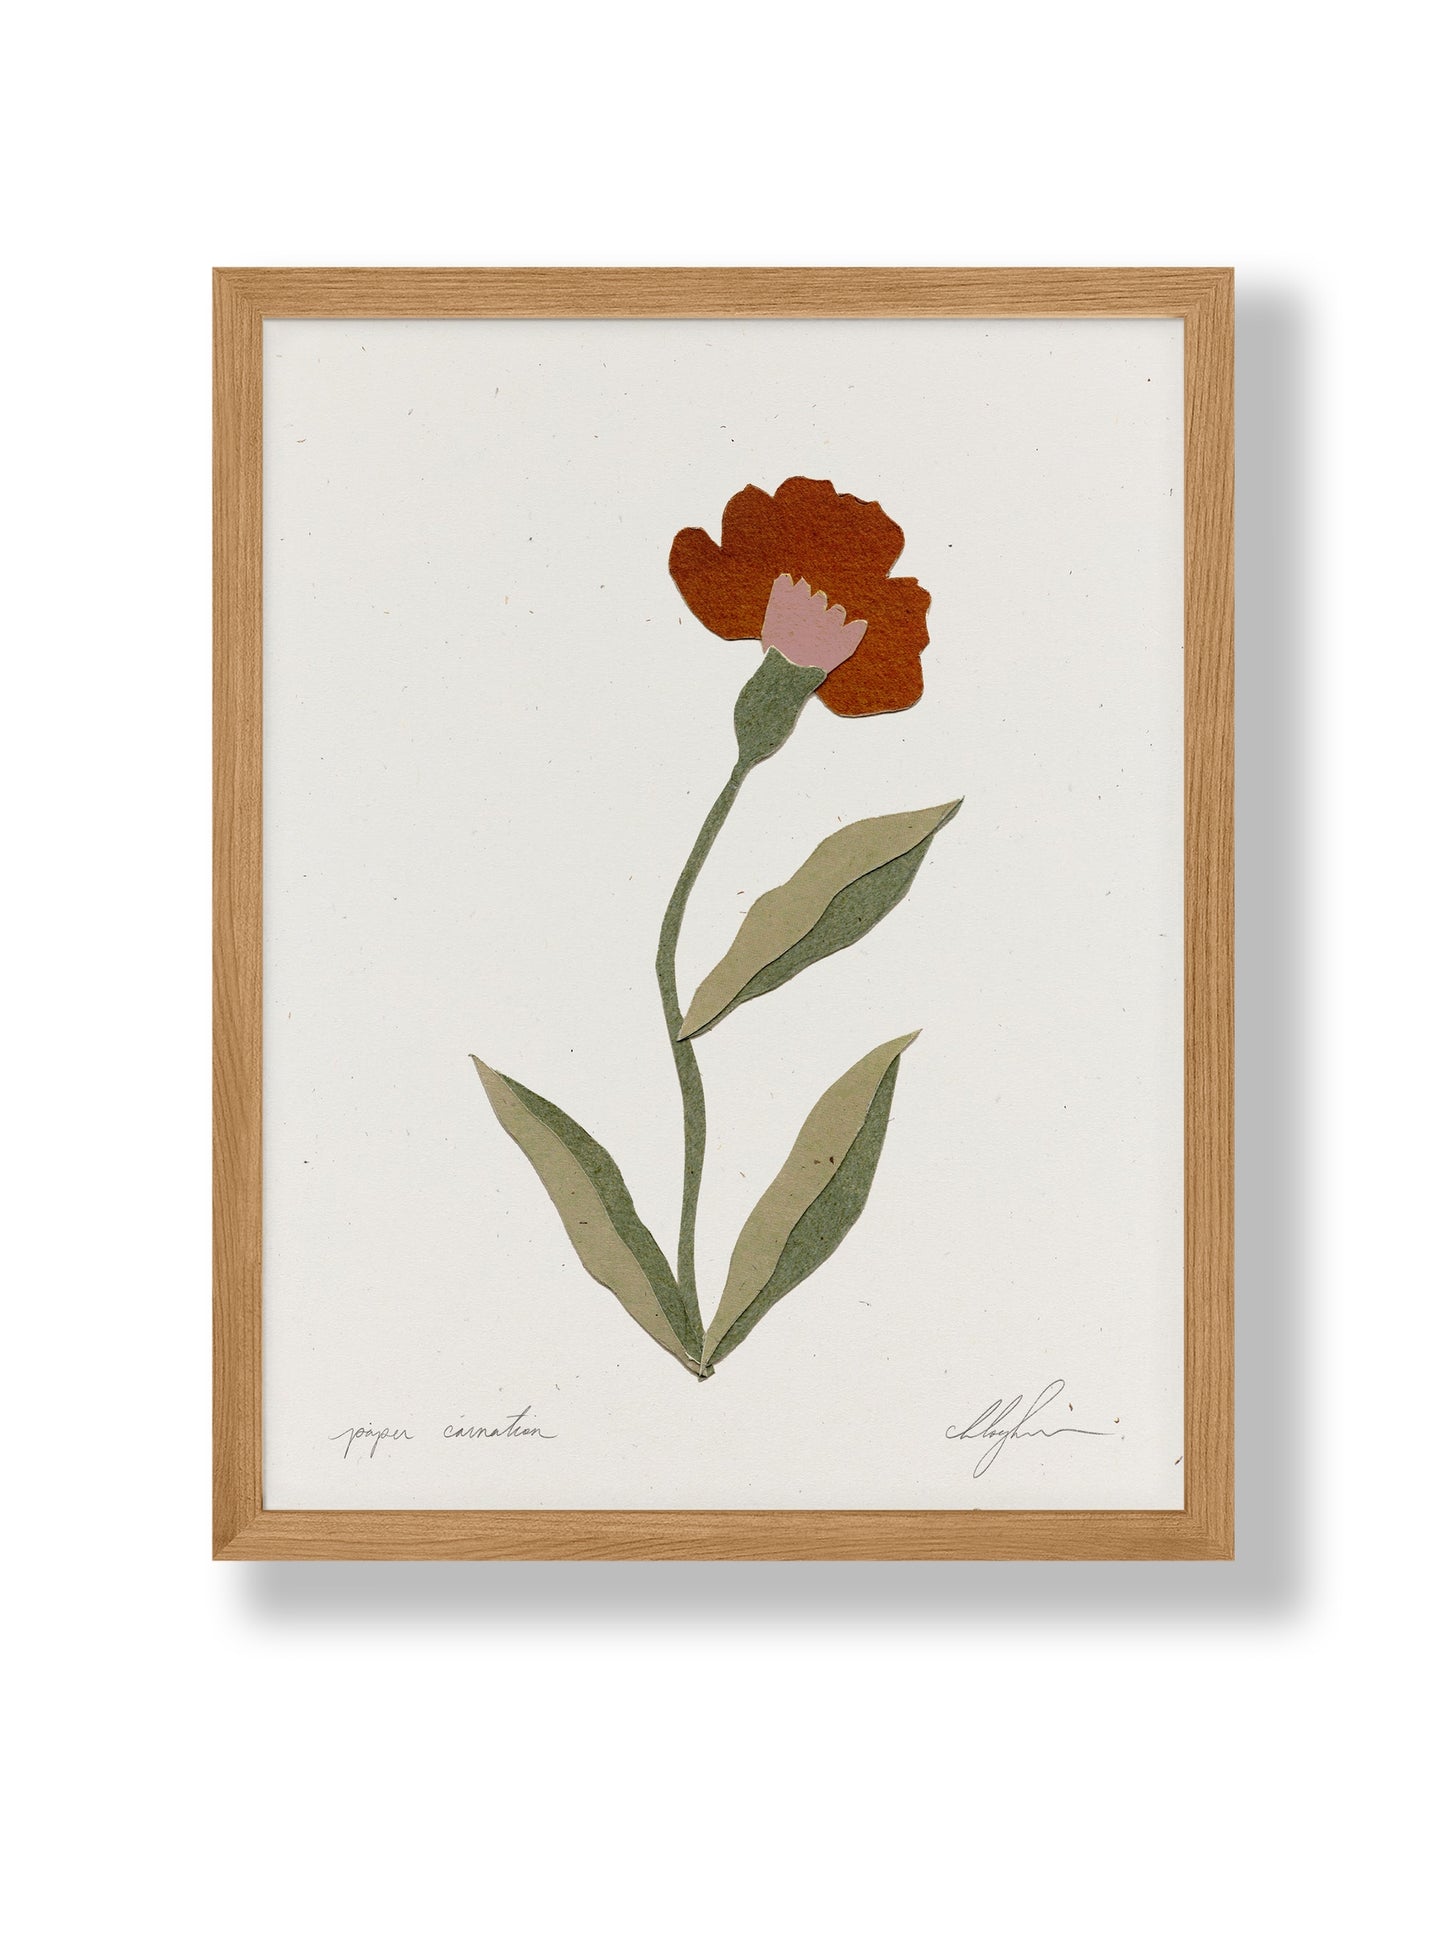 Paper Carnation by Coco Shalom. Prints are made with 100% recycled paper, containing 30% post consumer waste, produced with 100% green power and 0% BS.